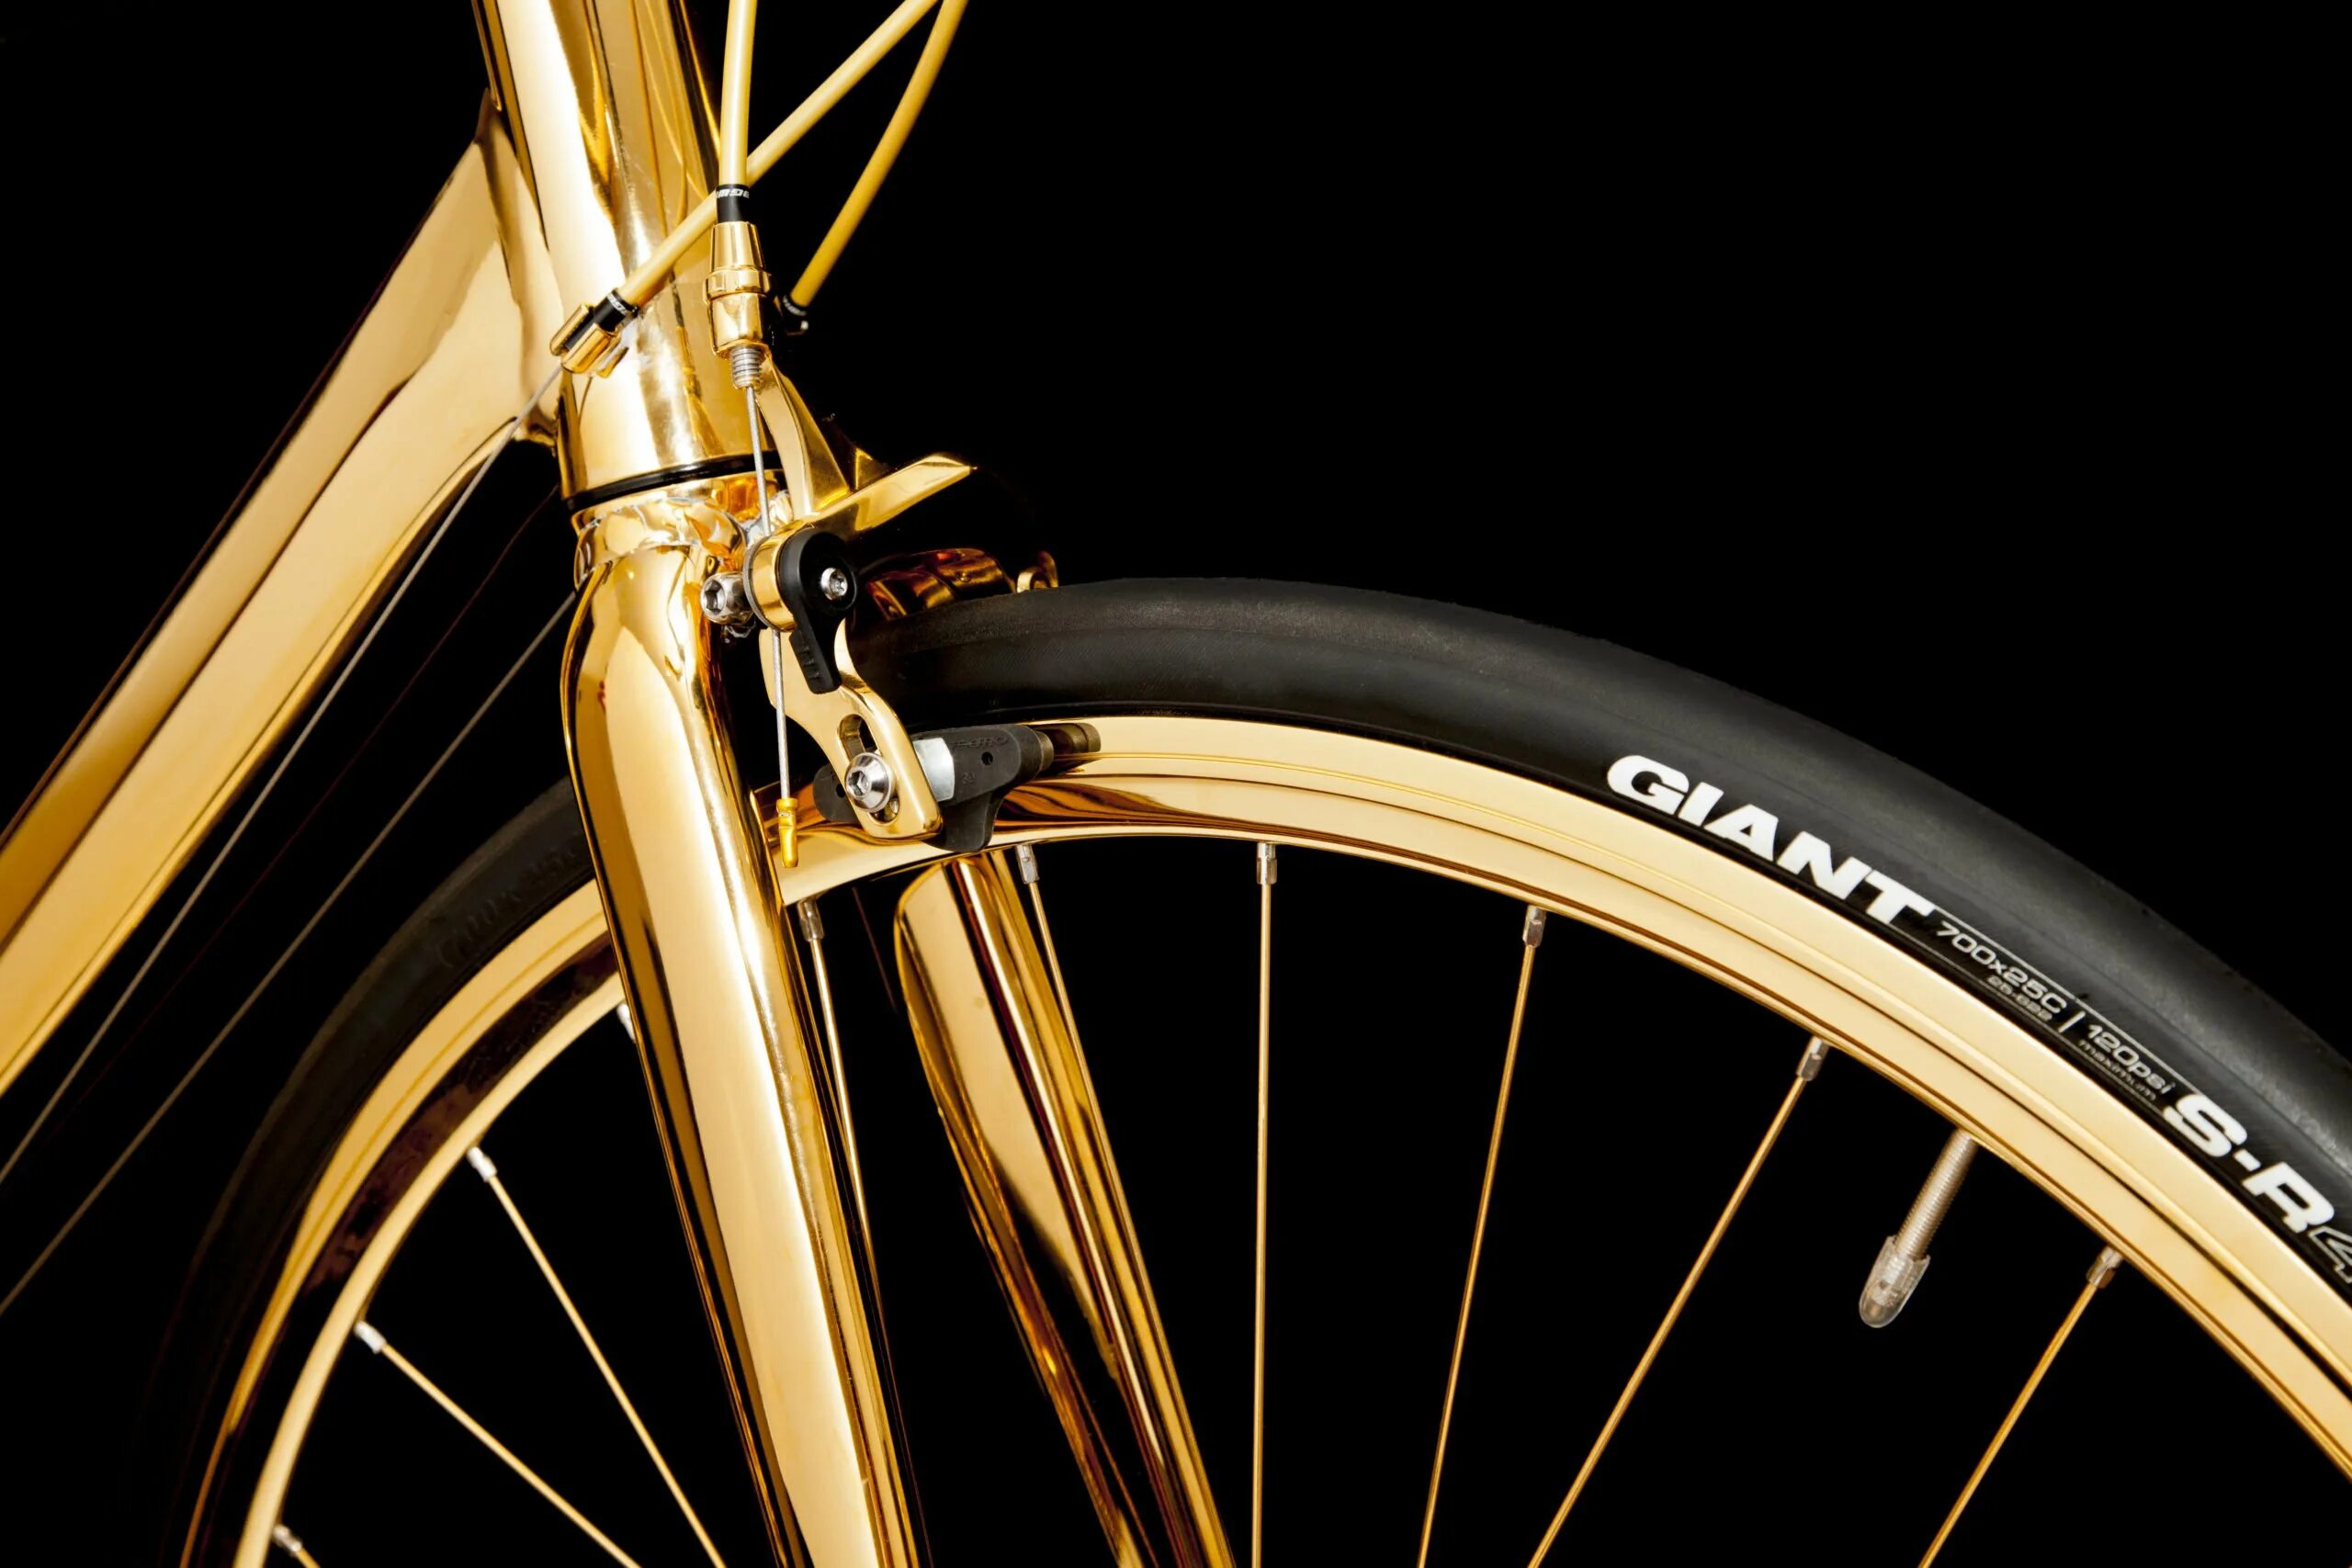 Aurumania Crystal Edition Gold Bike. Bicycle Goldgenie 24k Gold. 24k Gold extreme Mountain Bike. House of Solid Gold велосипед.